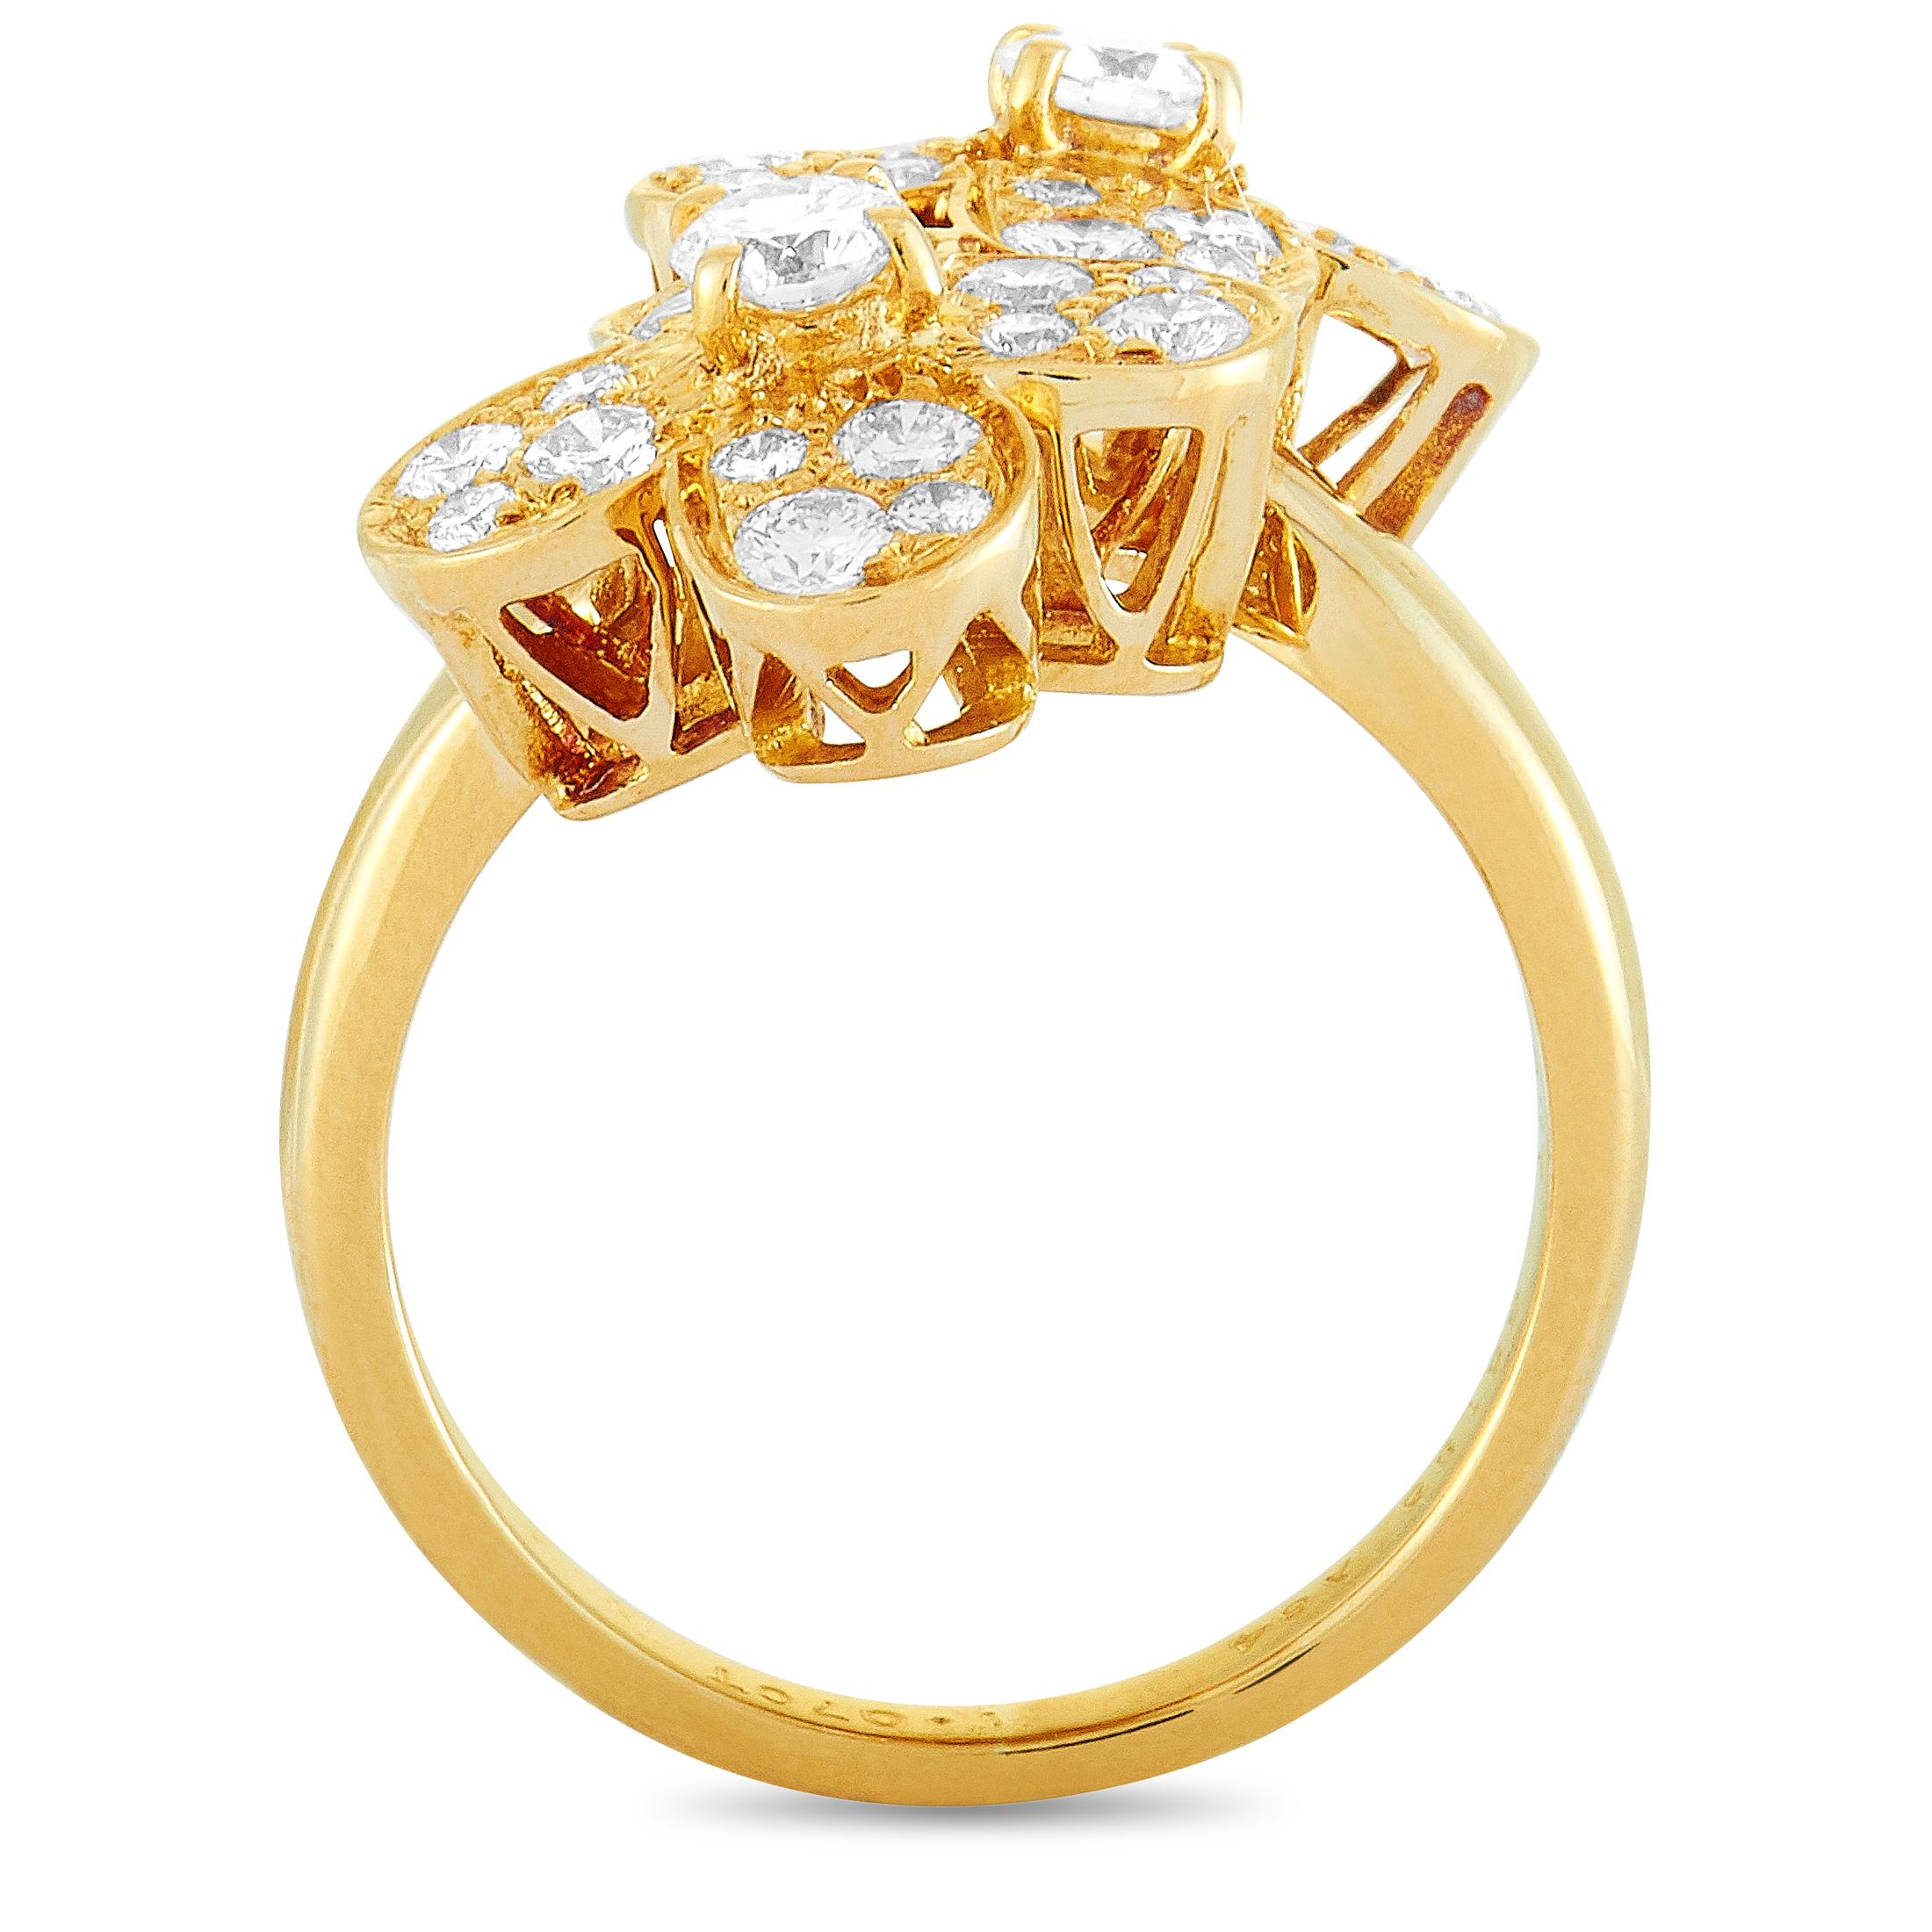 This Van Cleef & Arpels ring is made out of 18K yellow gold and diamonds that total 1.07 carats and feature grade F color and VS1 clarity. The ring weighs 6.1 grams, boasting band thickness of 2 mm and top height of 8 mm, while top dimensions